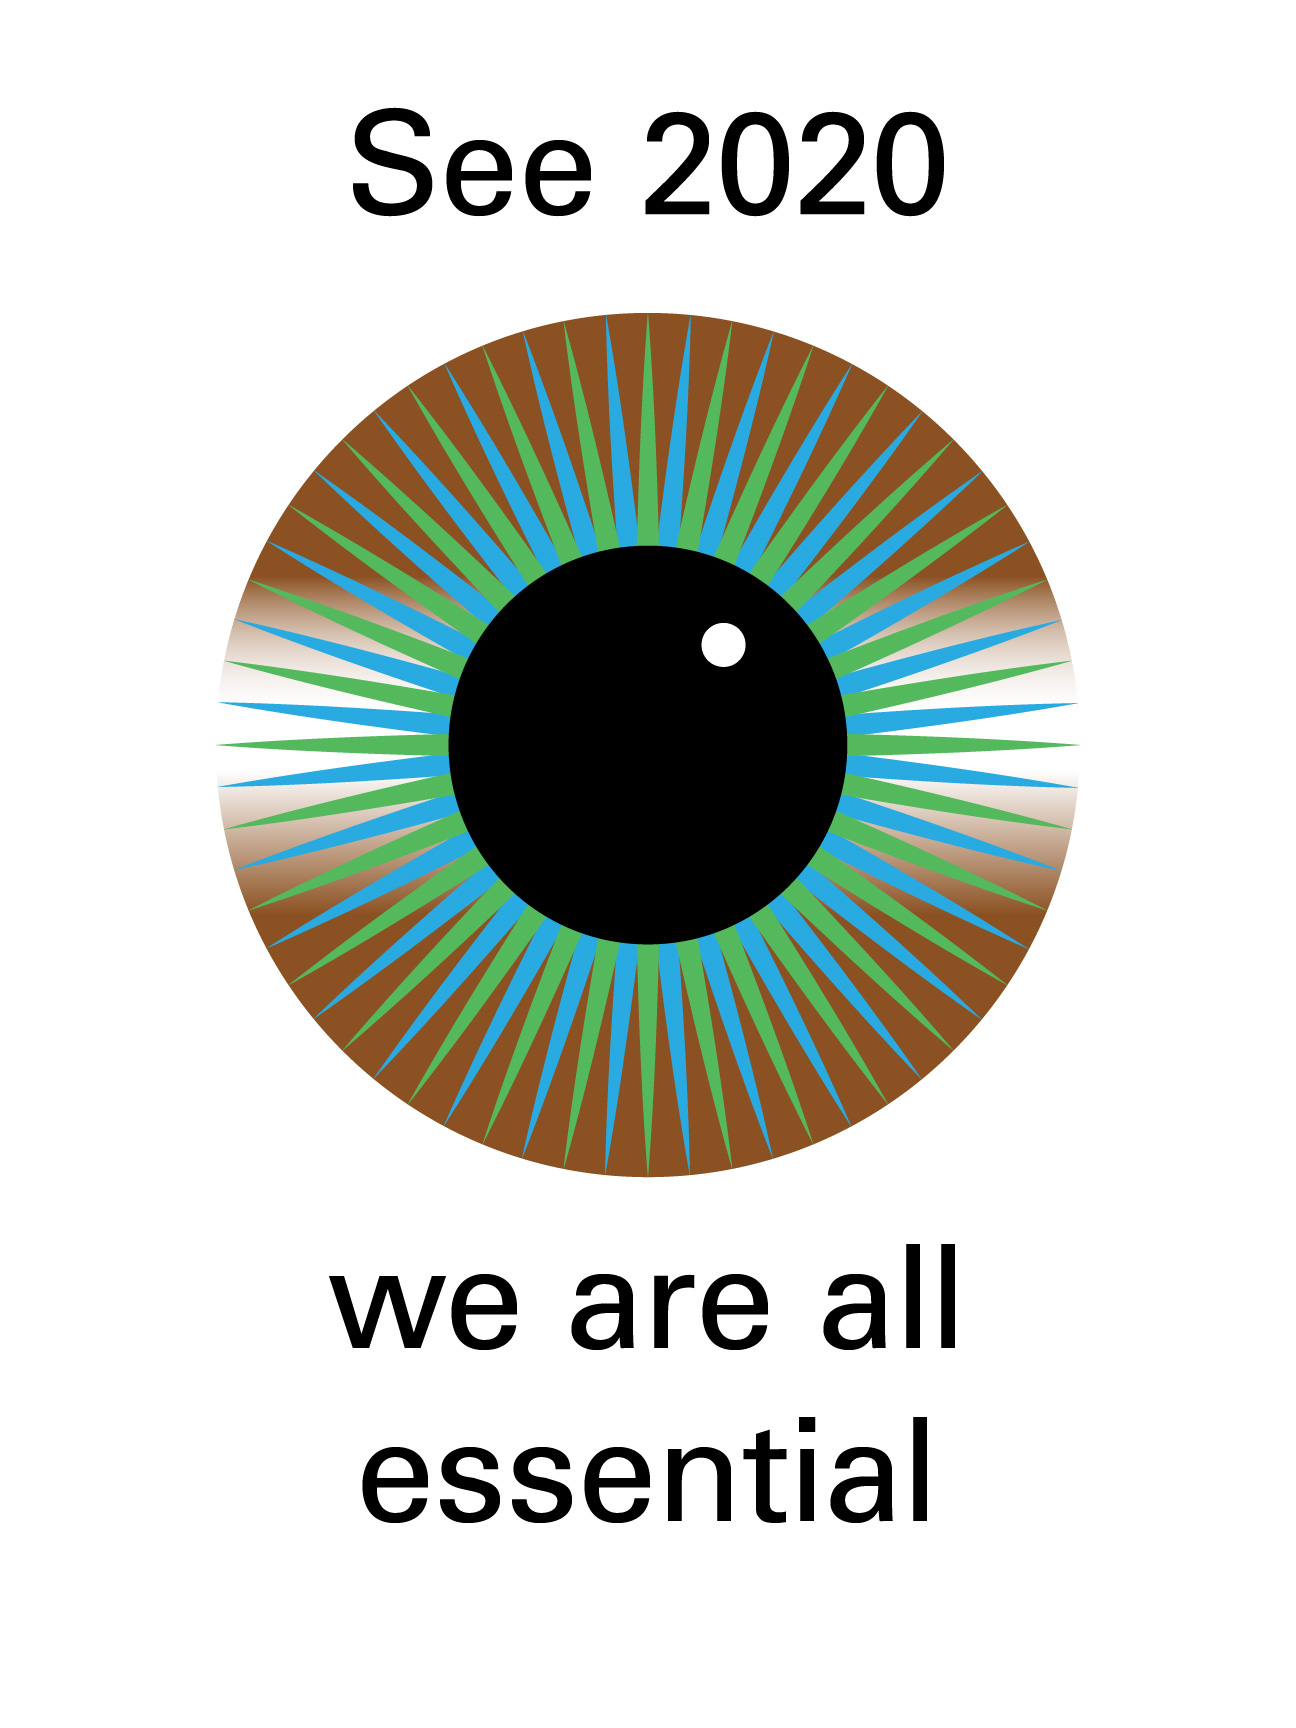 Illustrative poster of an eye. Black text against a white background: 